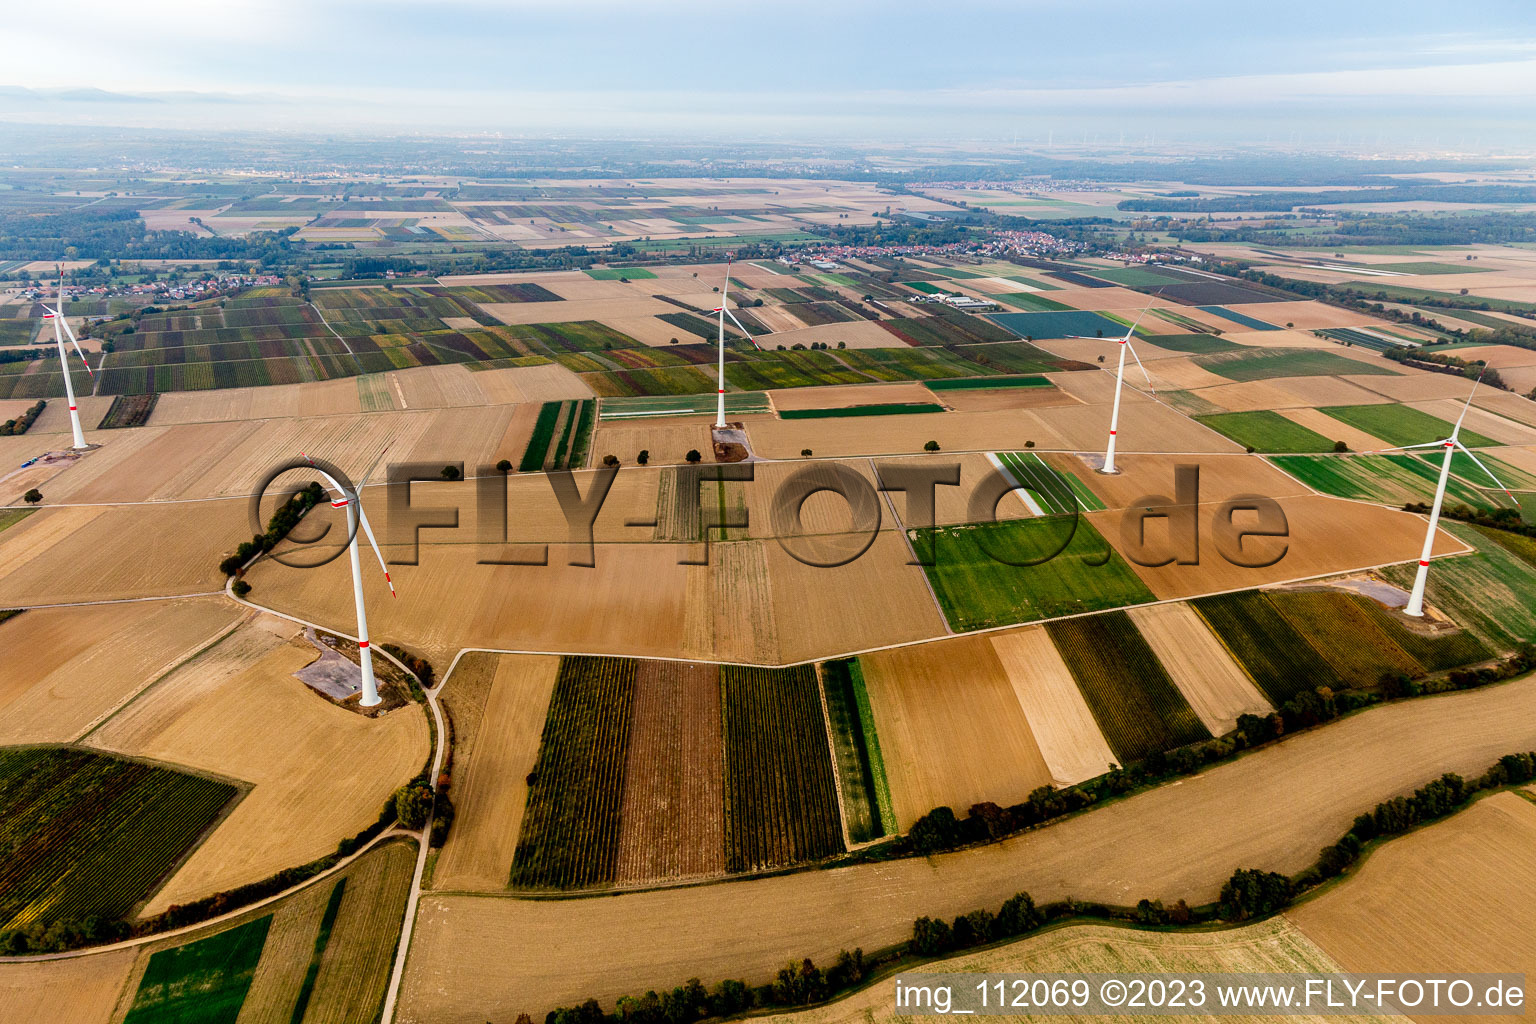 EnBW wind farm - wind turbine with 6 wind turbines in Freckenfeld in the state Rhineland-Palatinate, Germany from the plane